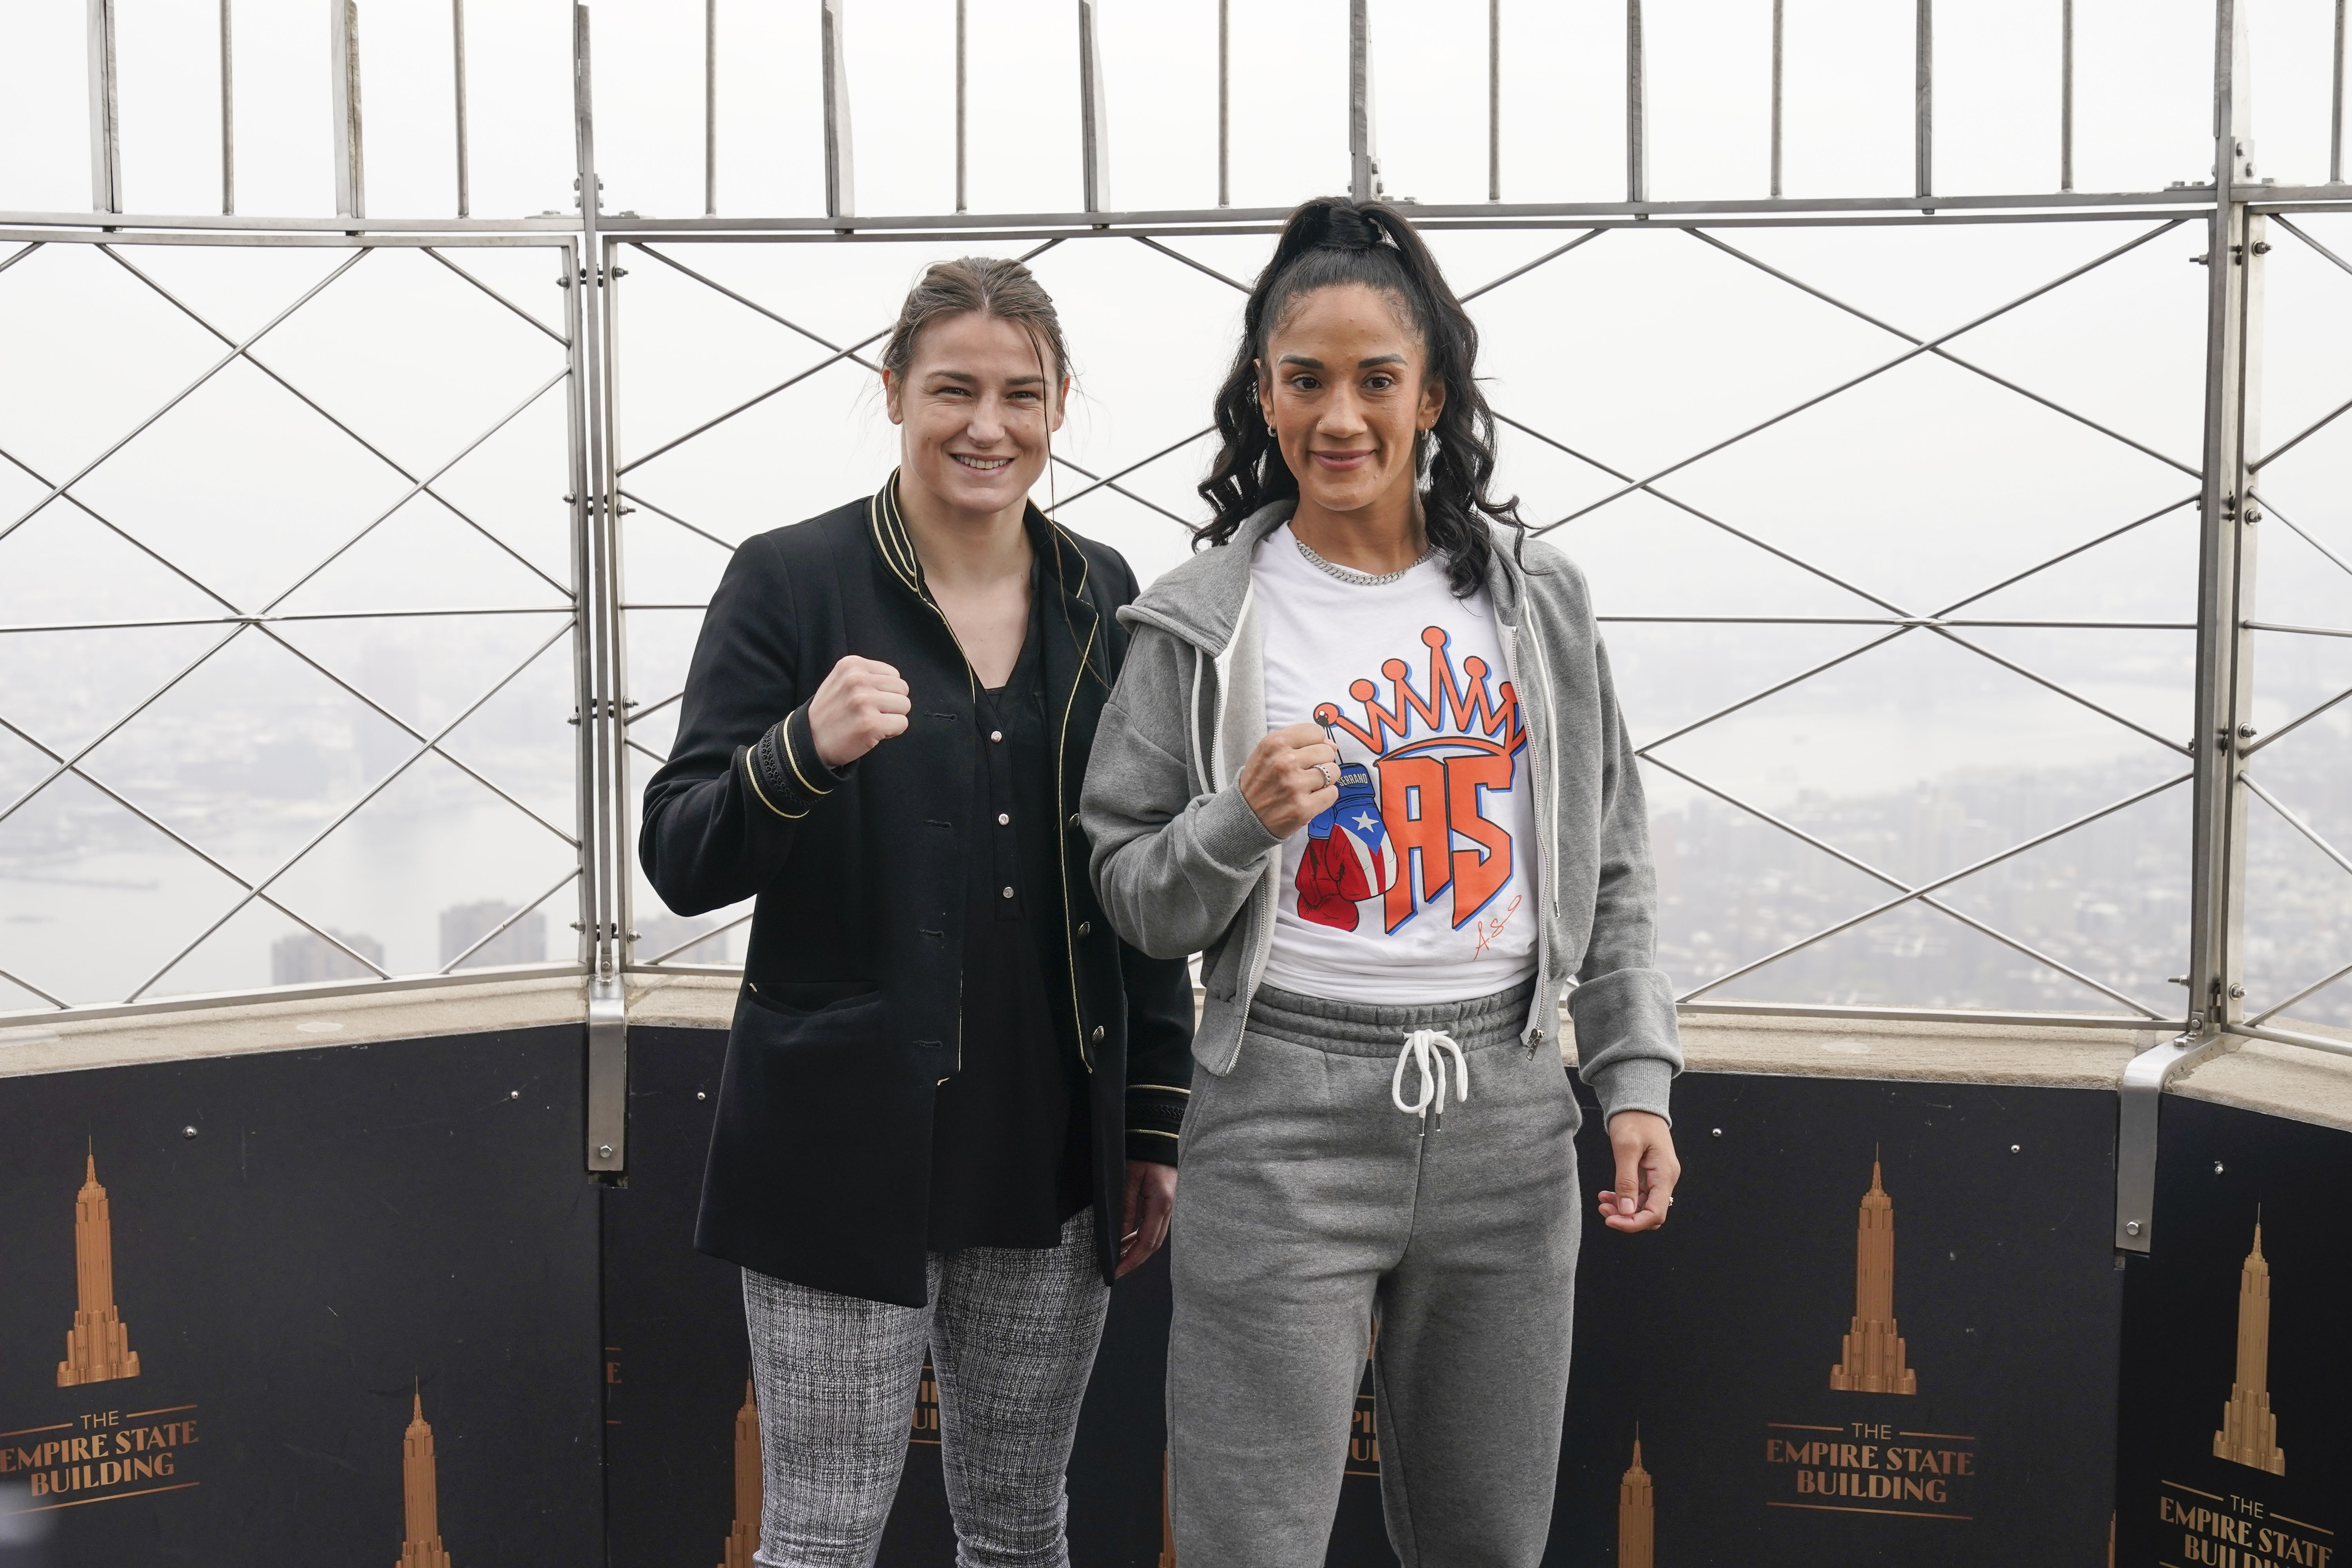 Taylor vs Serrano at MSG is a main event for womens boxing